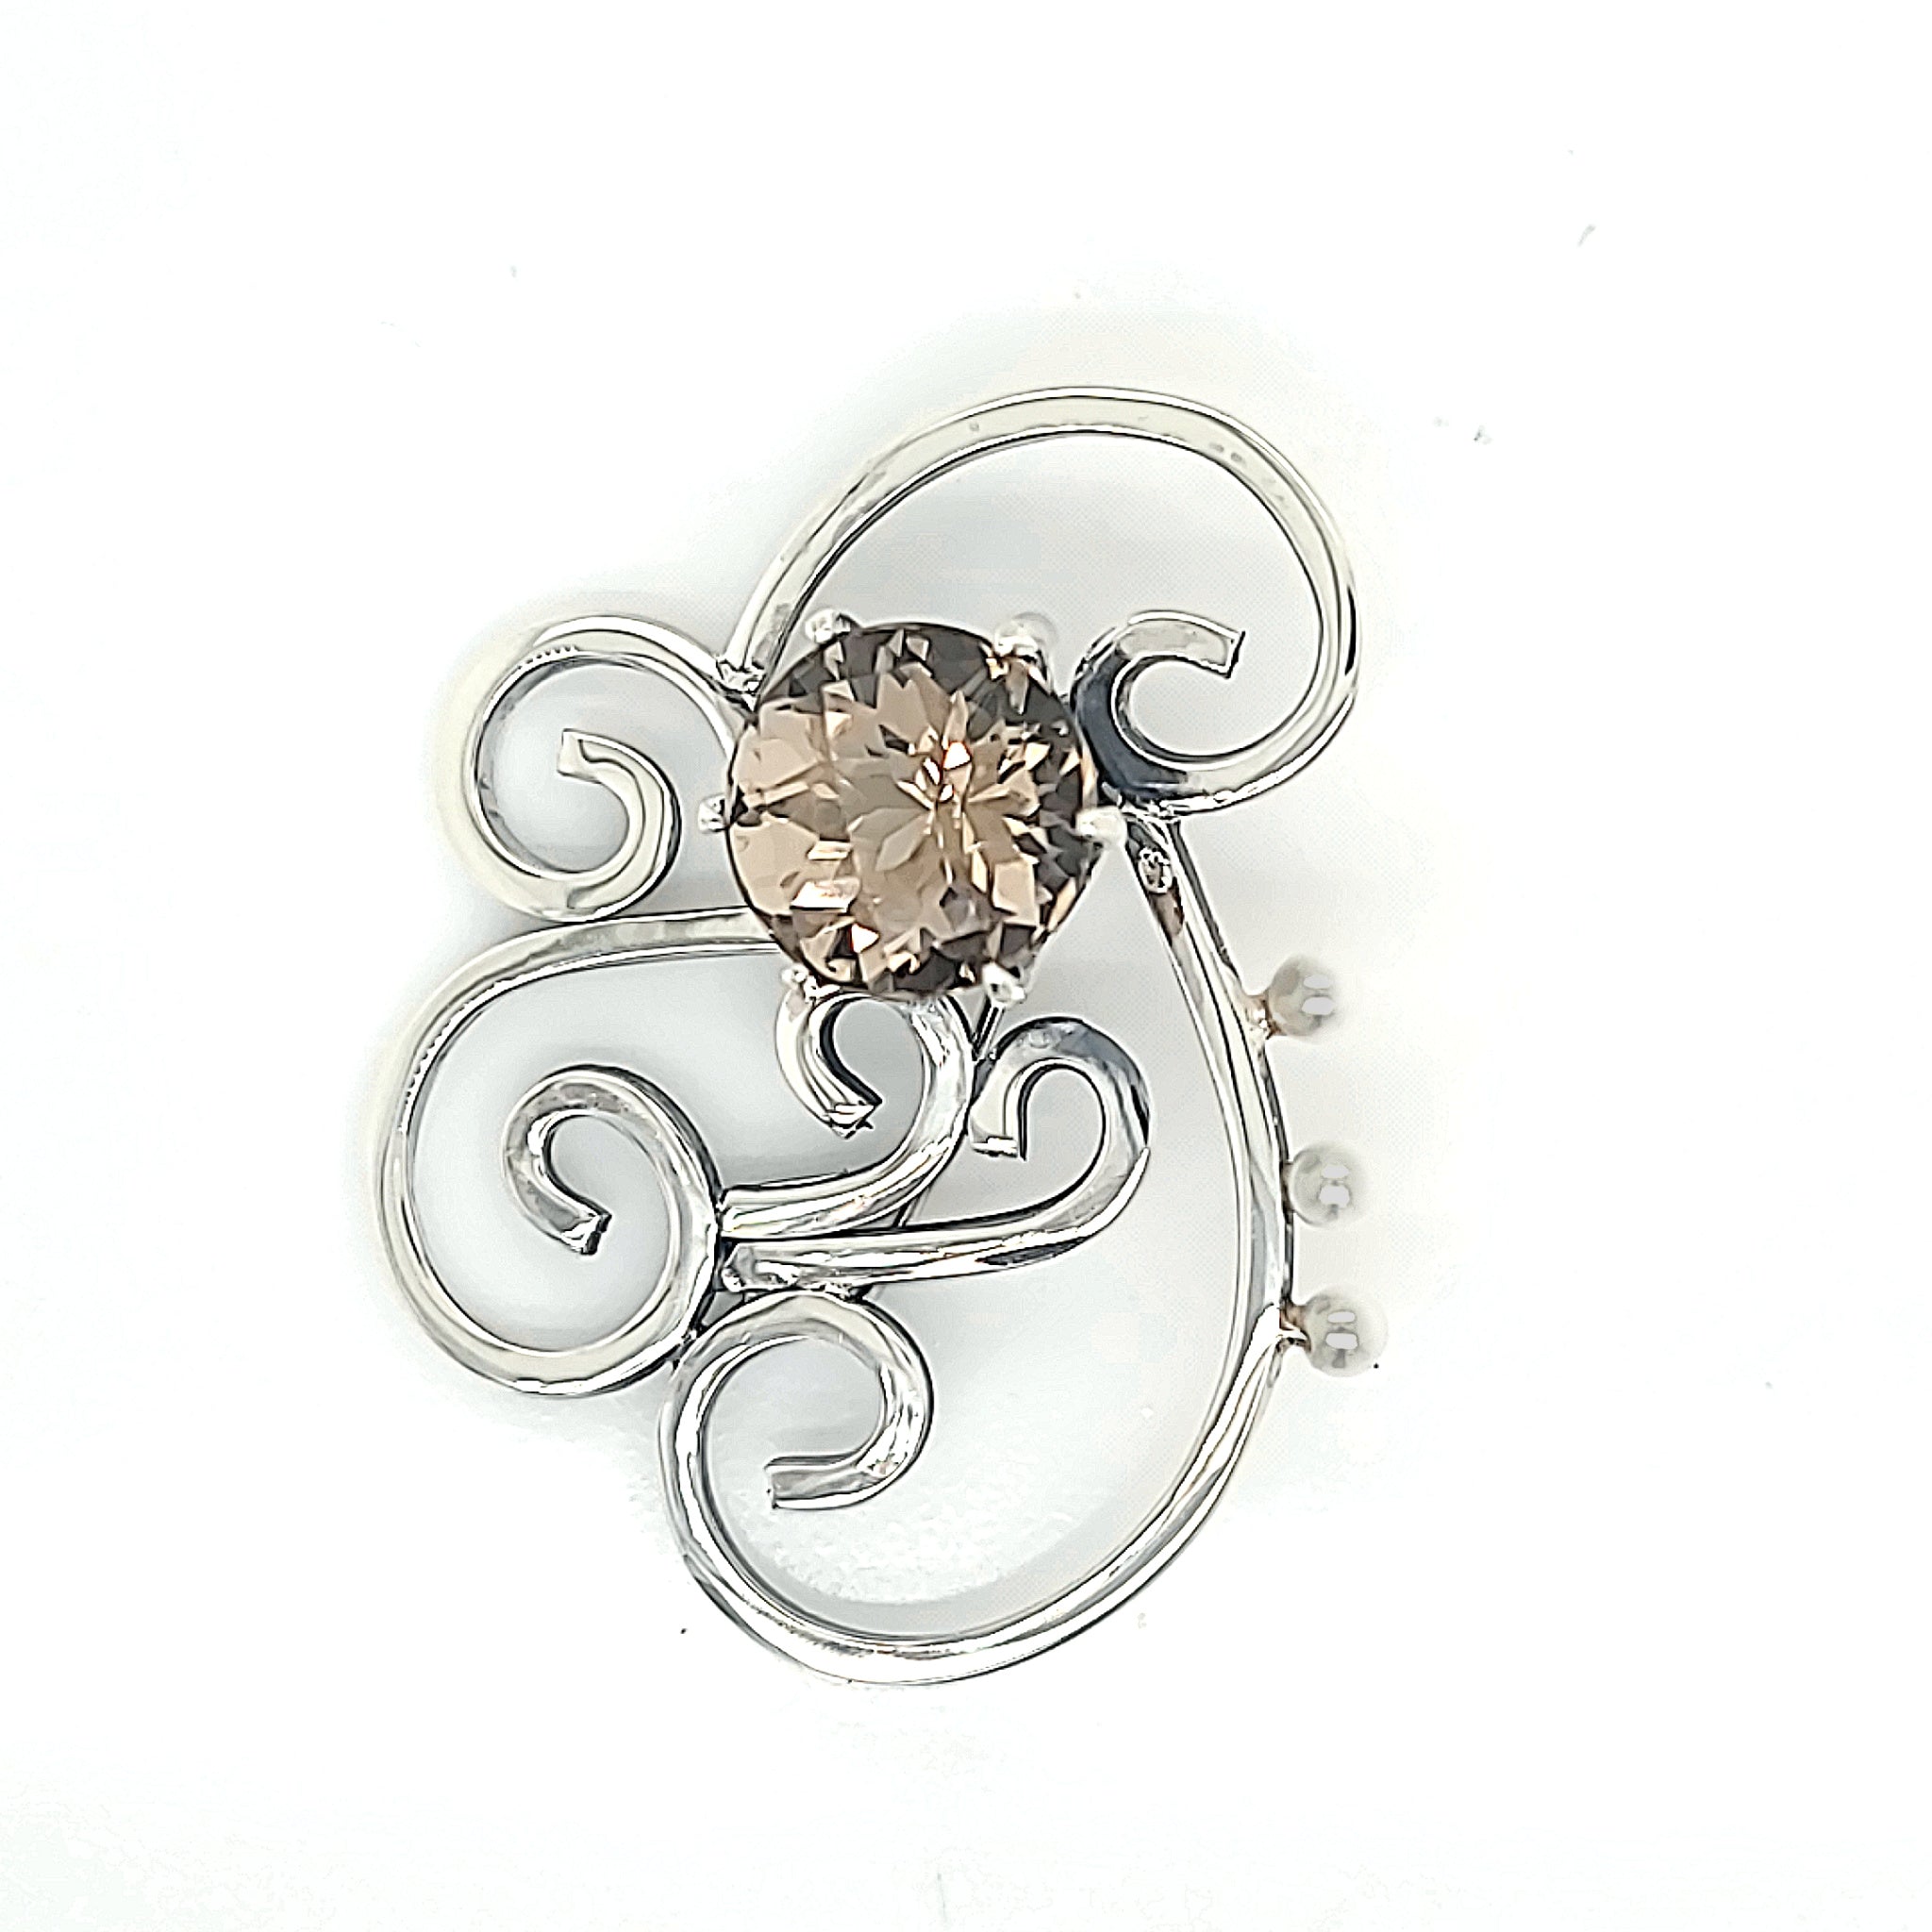 Beautiful and elegant Smoky Quartz Pin in Sterling Silver with Freshwater Pearls.